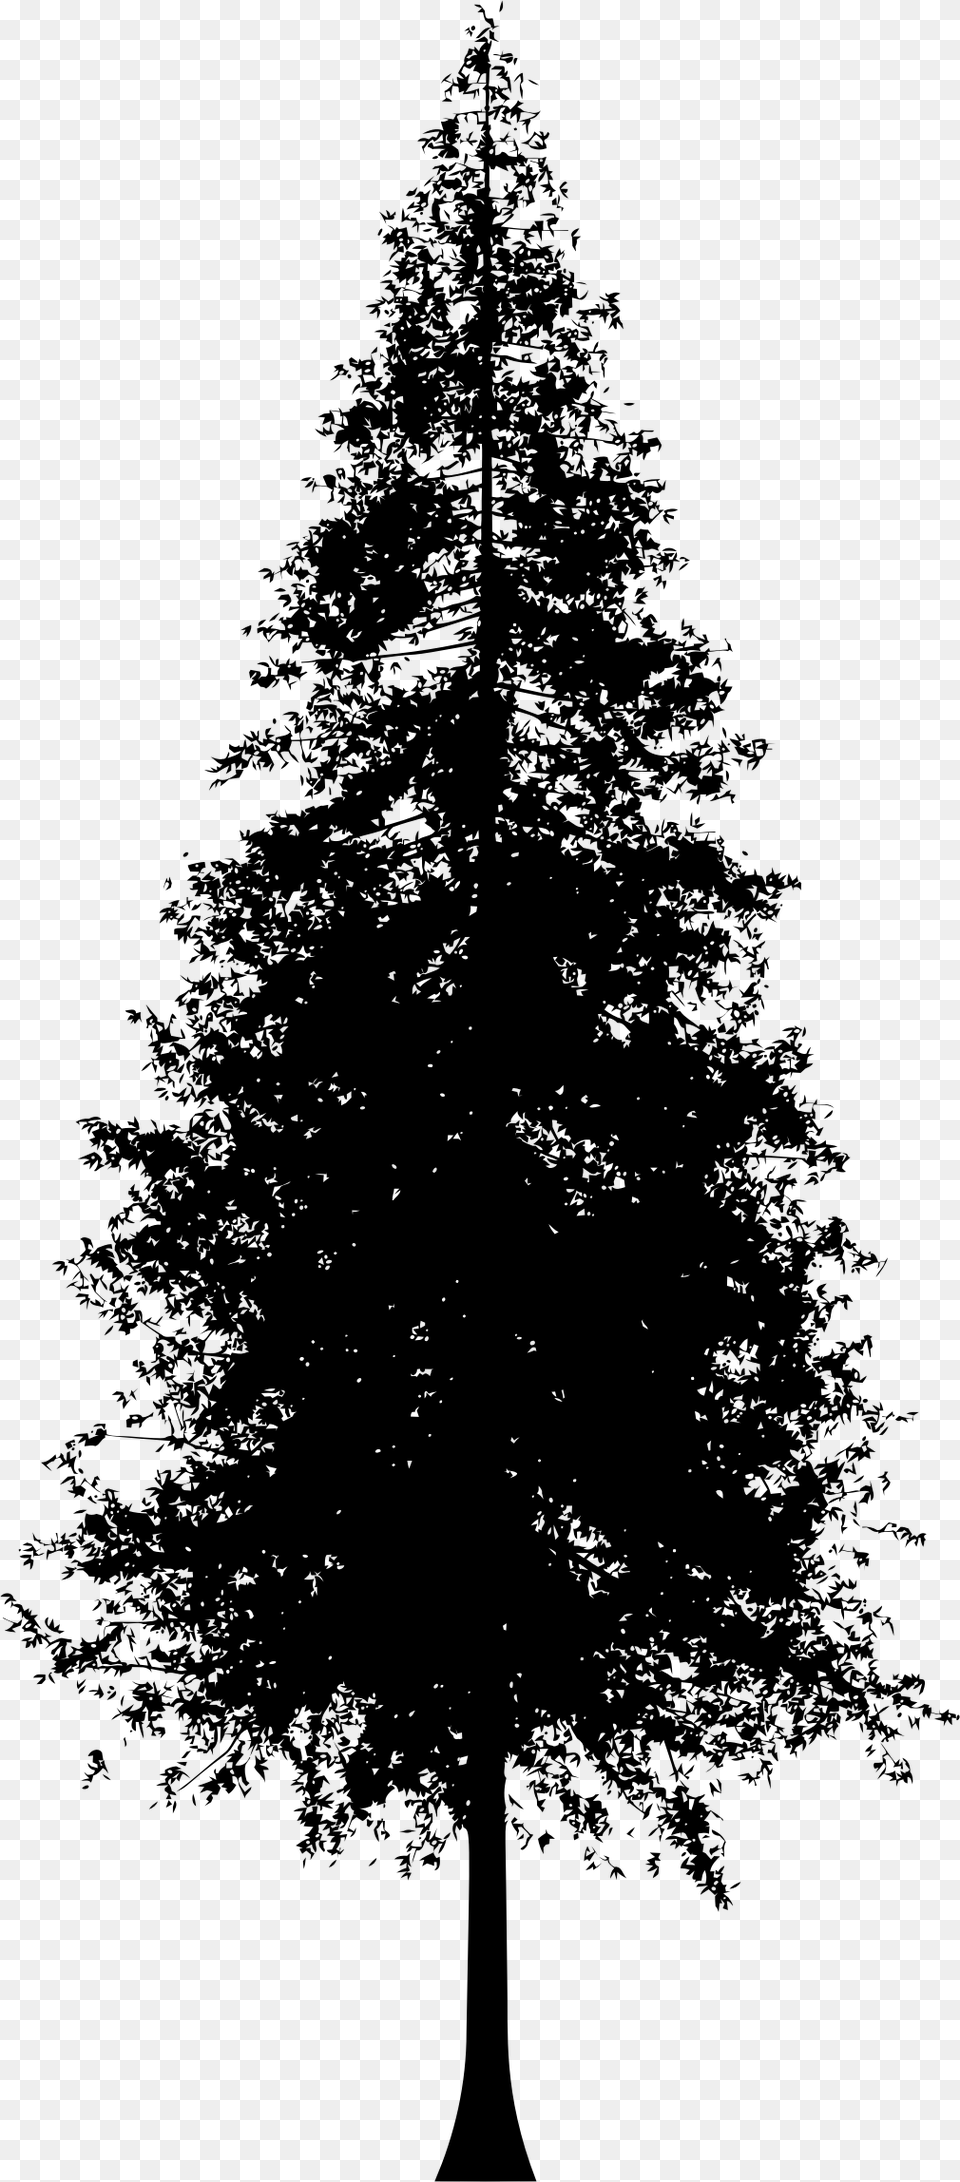 Redwood Tree Silhouette Graphic Stock Redwood Tree Line Art, Gray Free Transparent Png